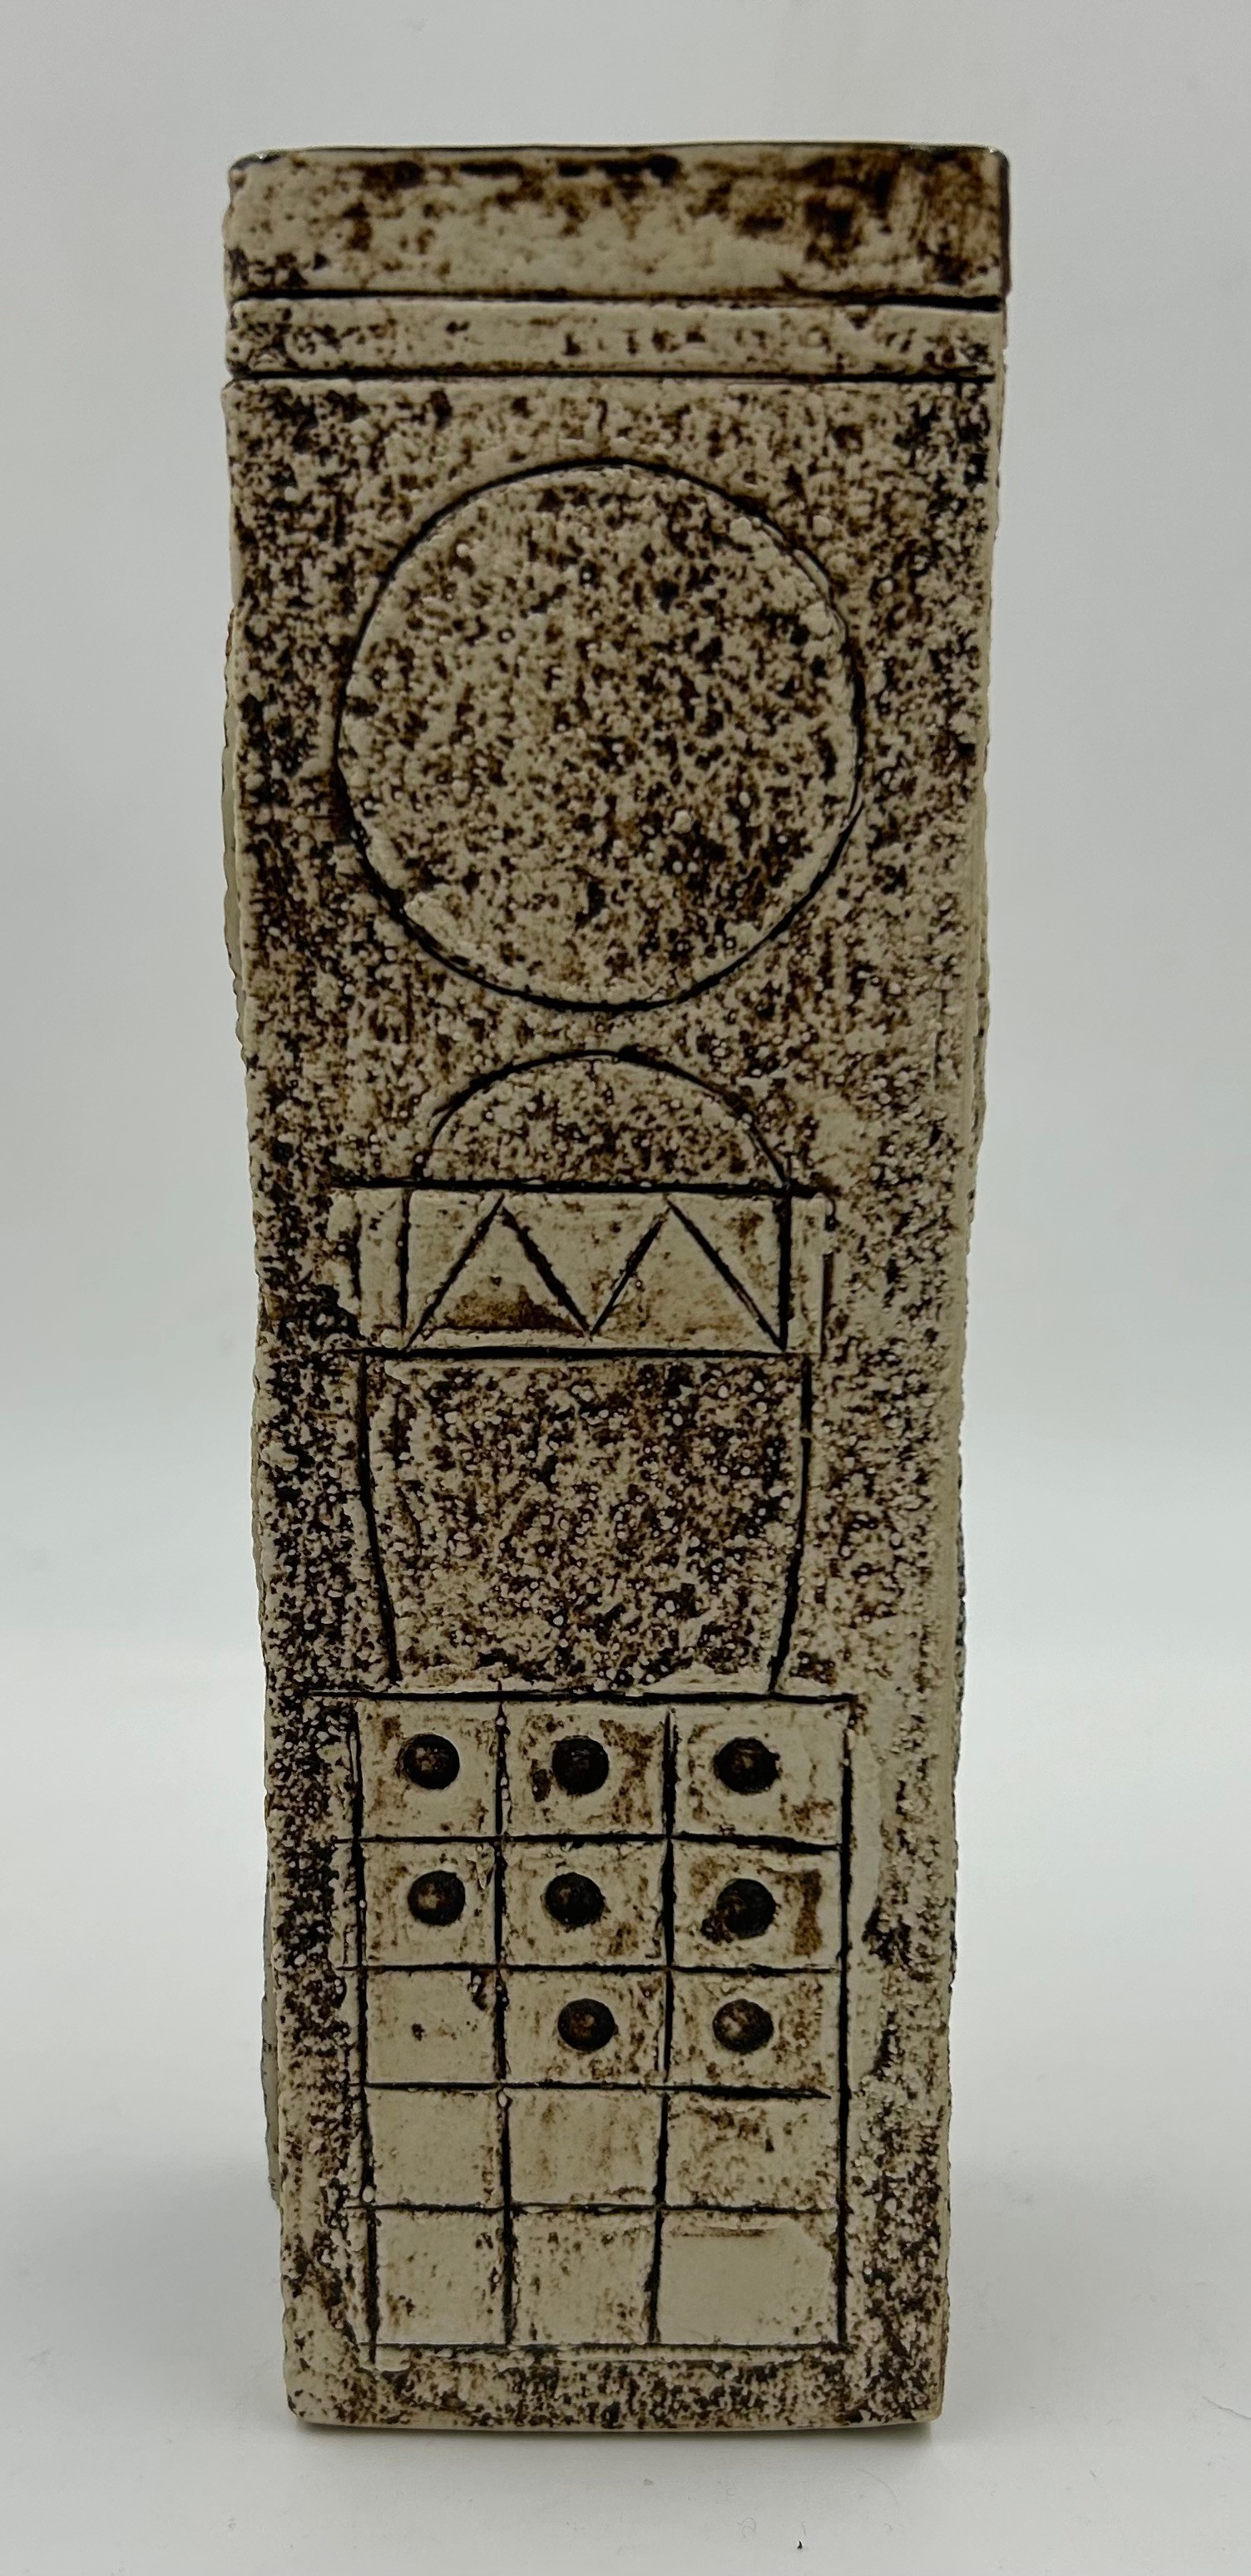 Troika pottery square vase with geometric decoration in brown and blue glazes marked Troika Cornwall - Image 4 of 5